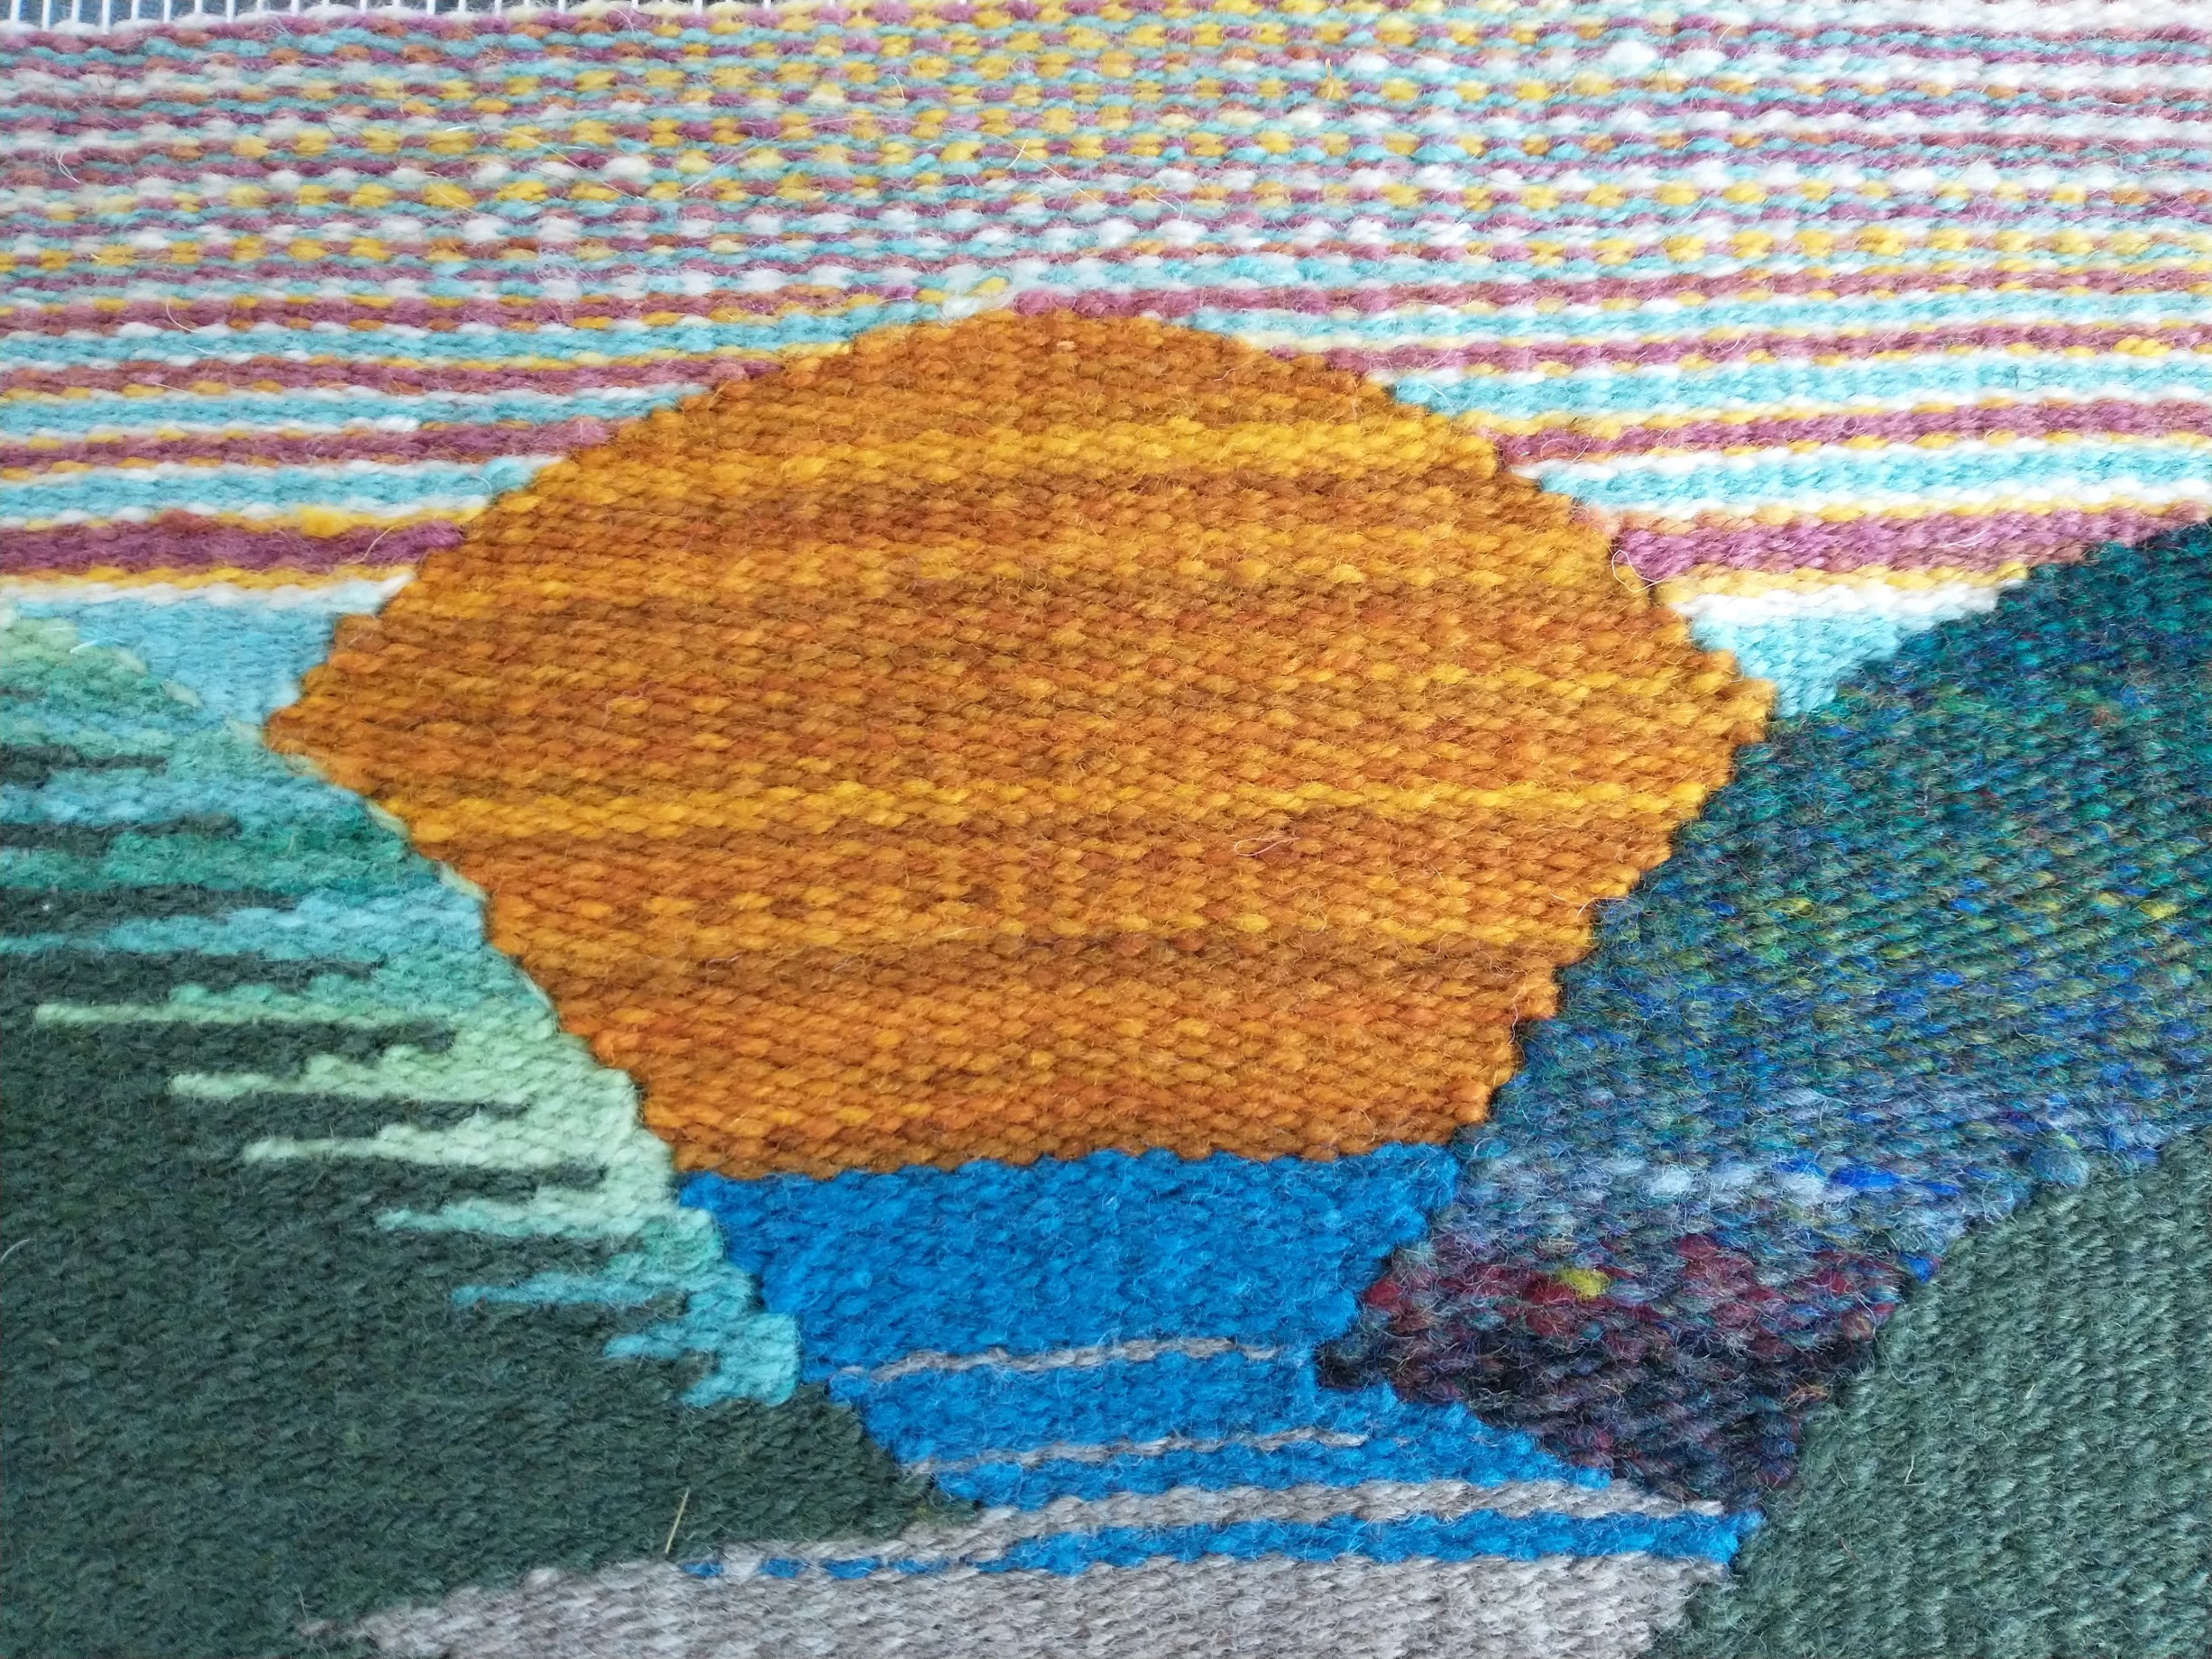 Introduction to Tapestry Weaving, Level 1: Online Course